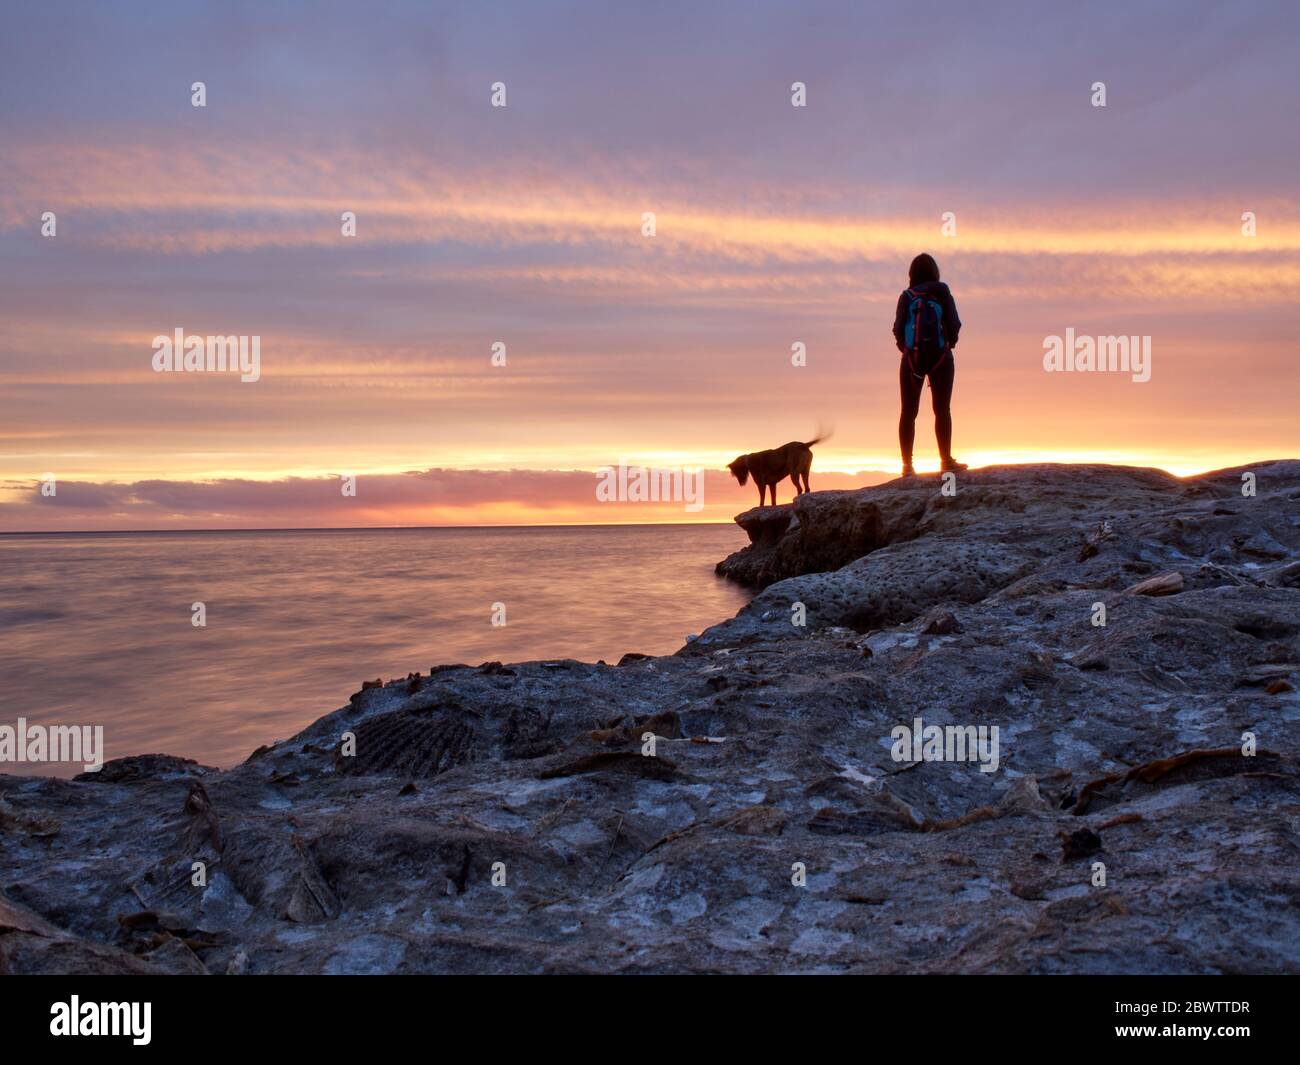 Rear view of woman standing with dog on rock formation at sea during sunset, Puerto Piramides, Argentina Stock Photo